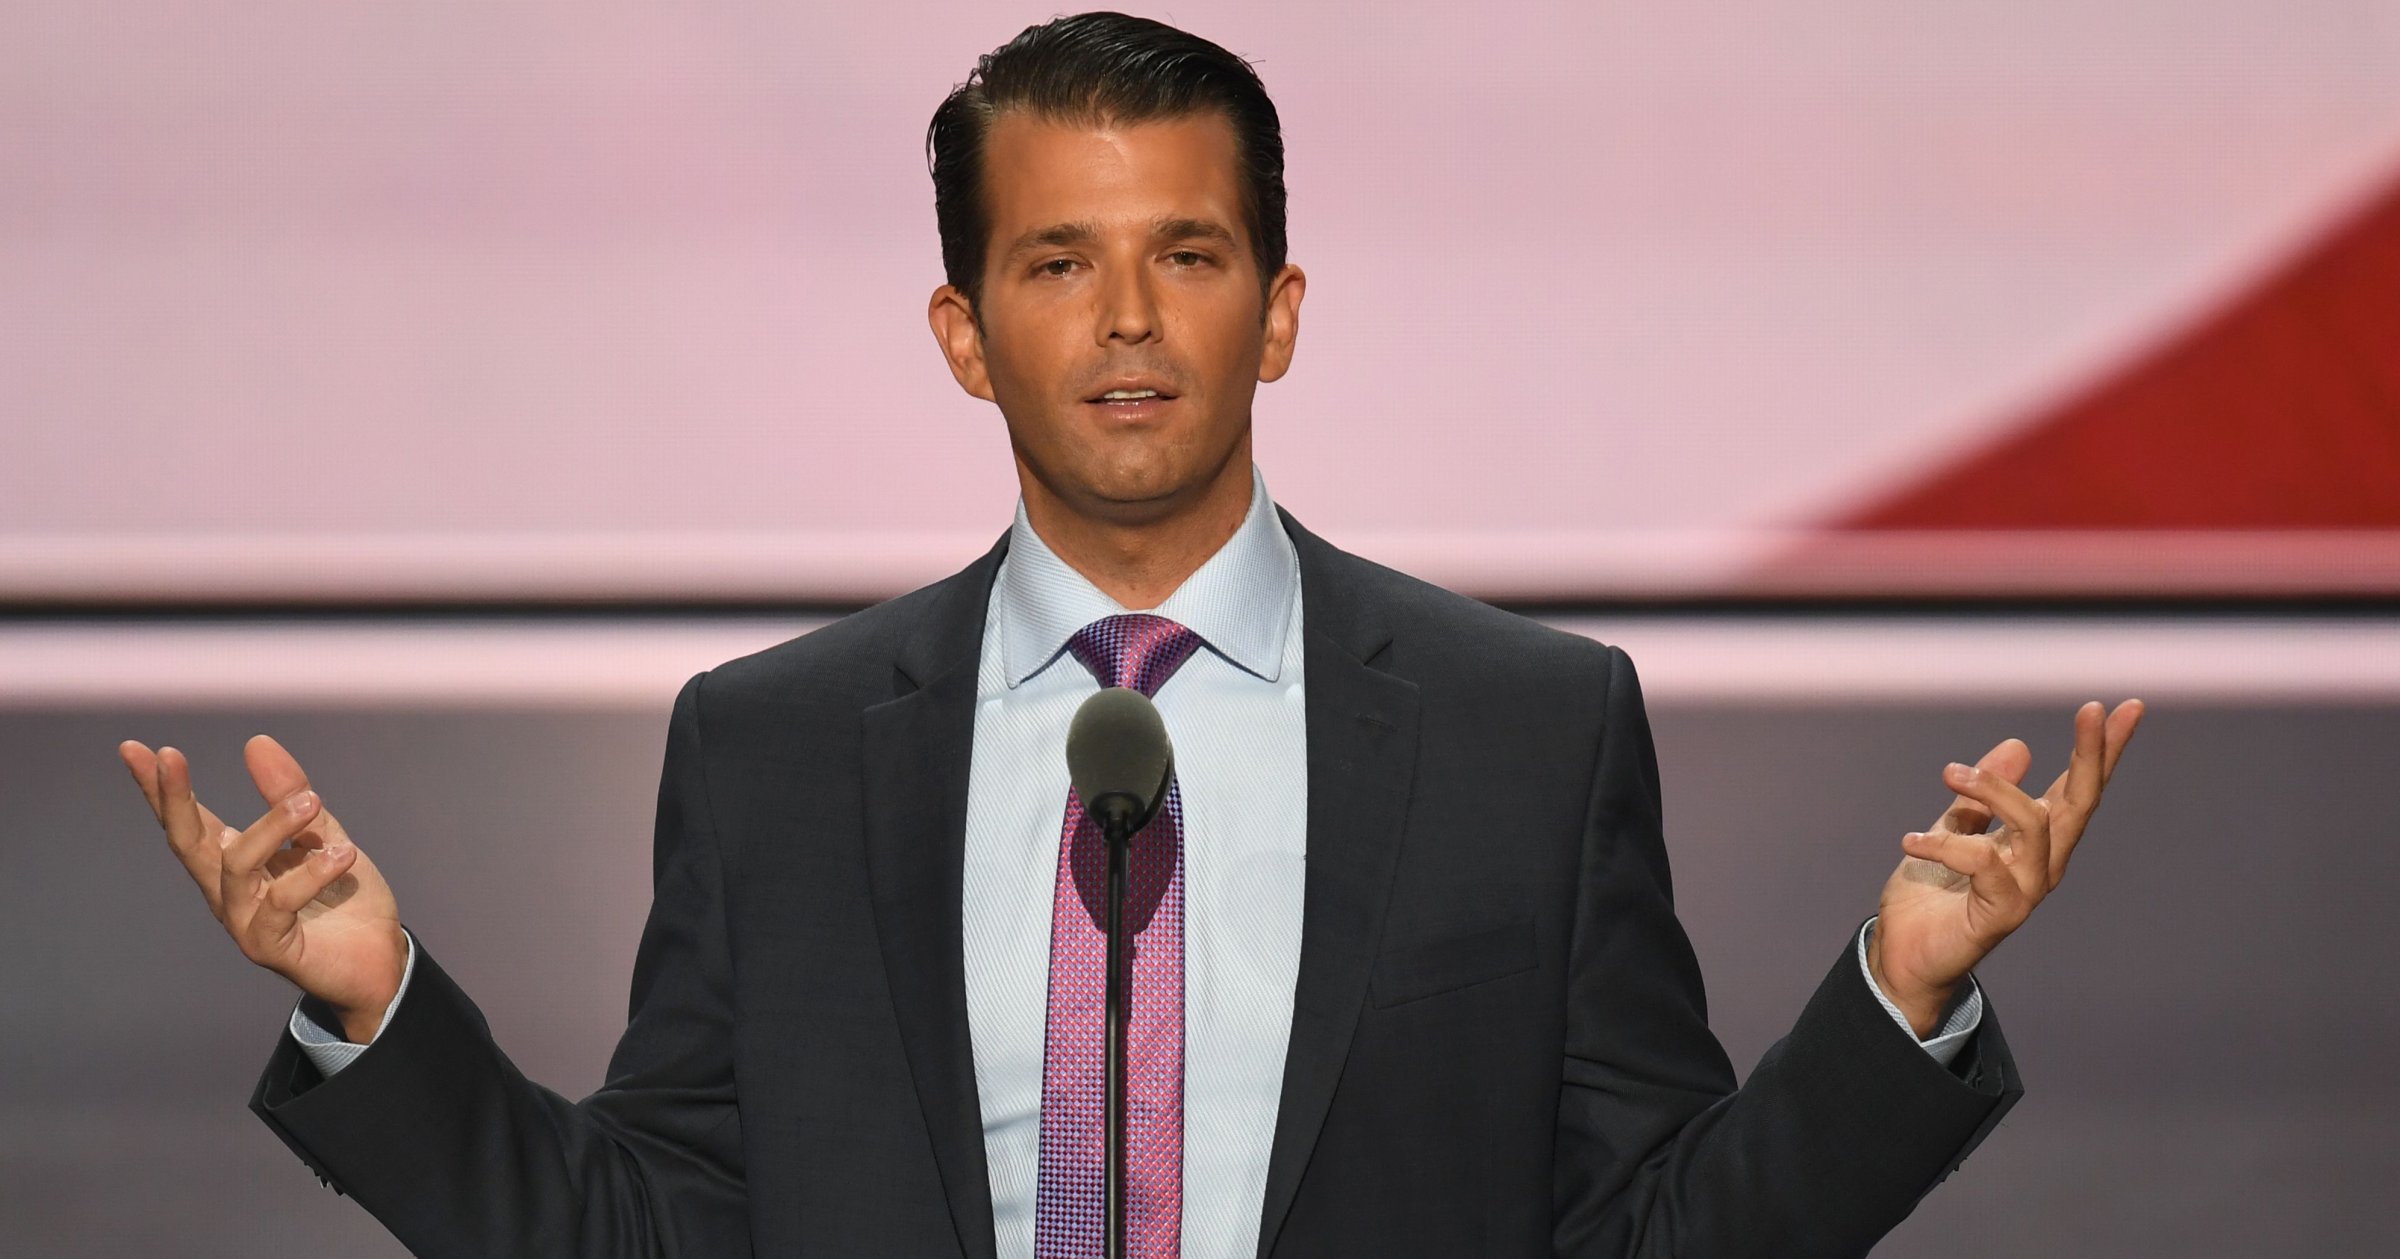 Donald Trump, Jr. in Cleveland, on July 19, 2016.